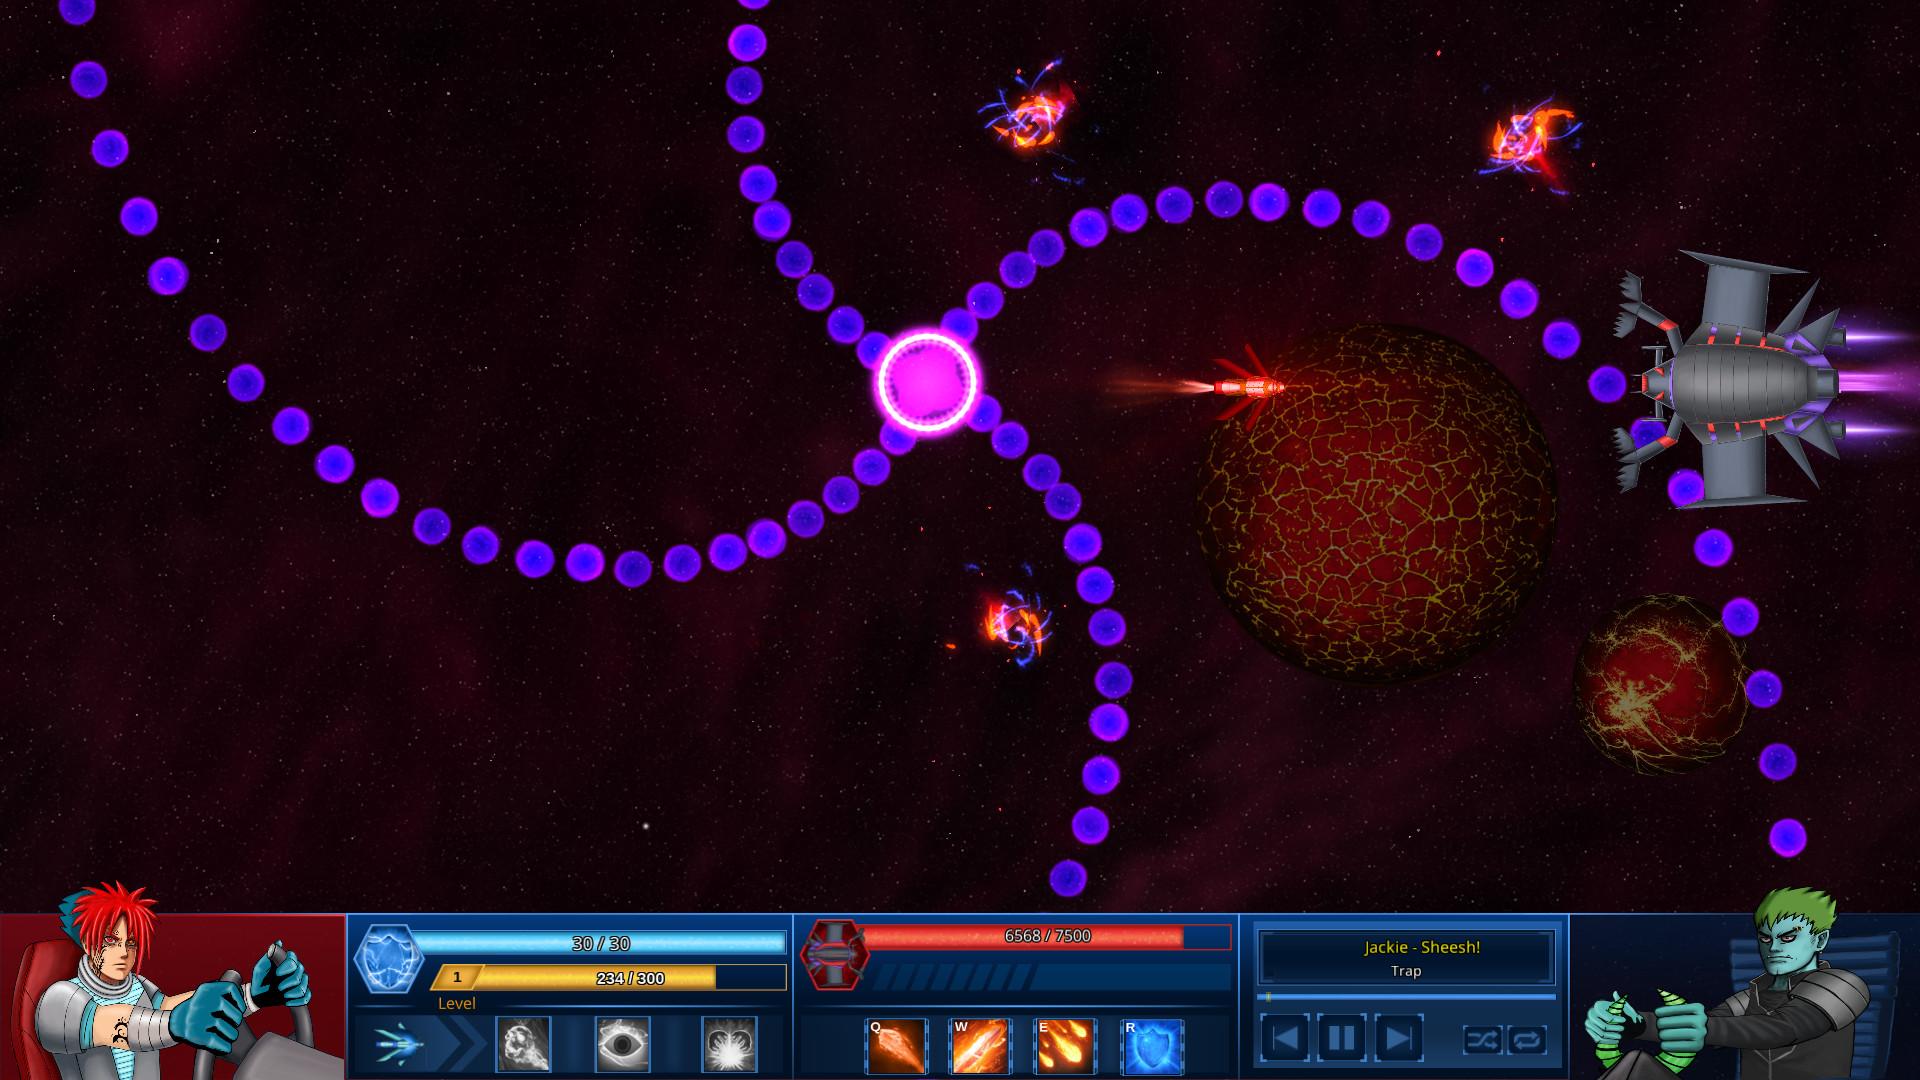 Screenshot №21 from game Survive in Space